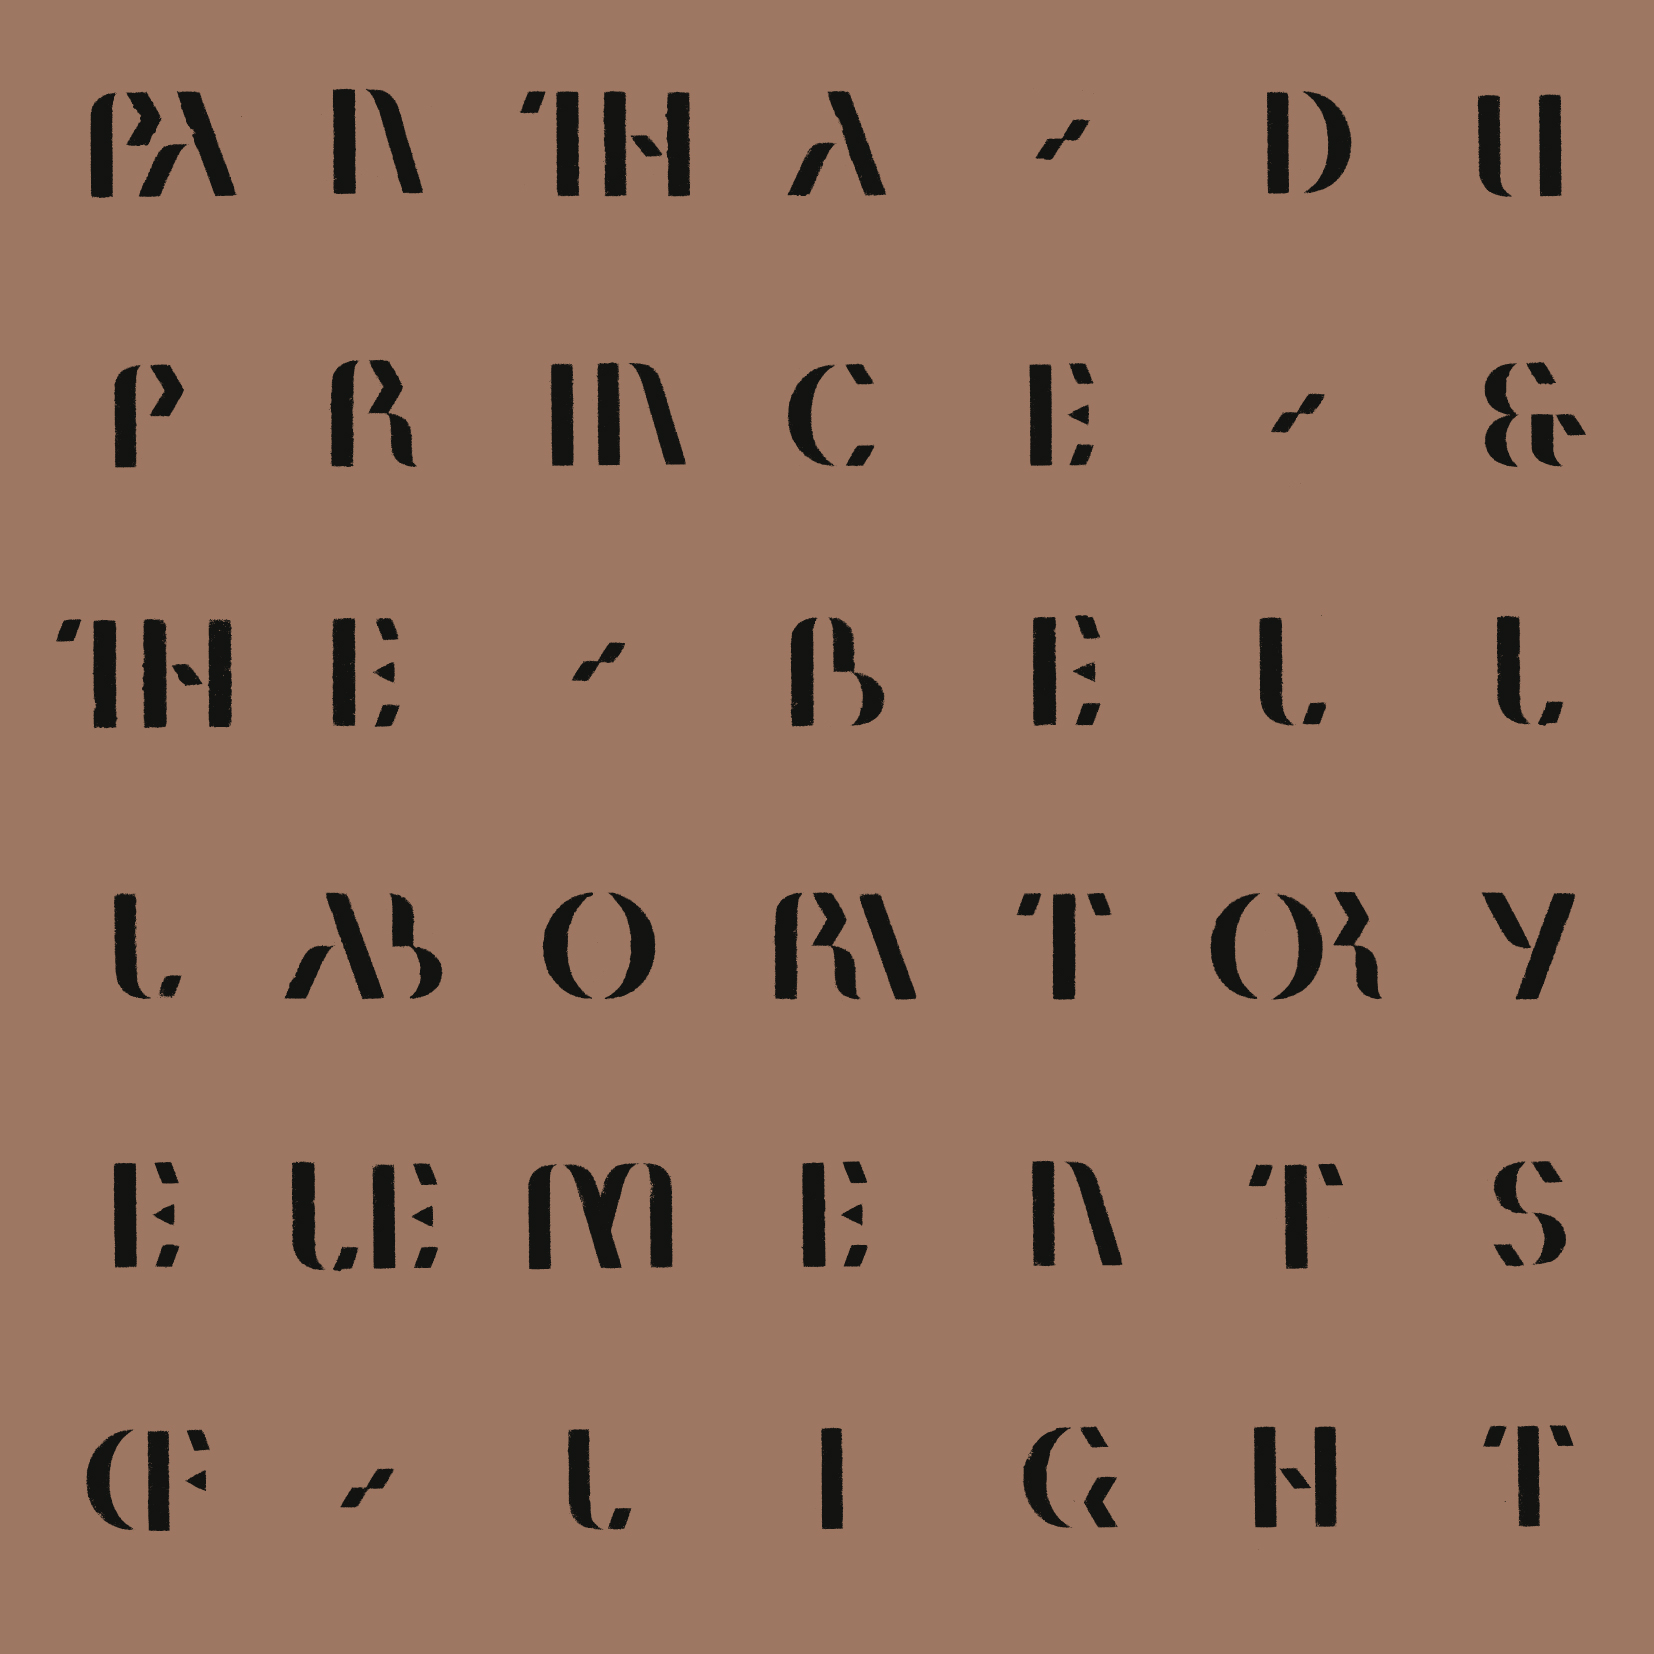 Pantha du Prince & The Bell Laboratory - Elements Of Light - CD